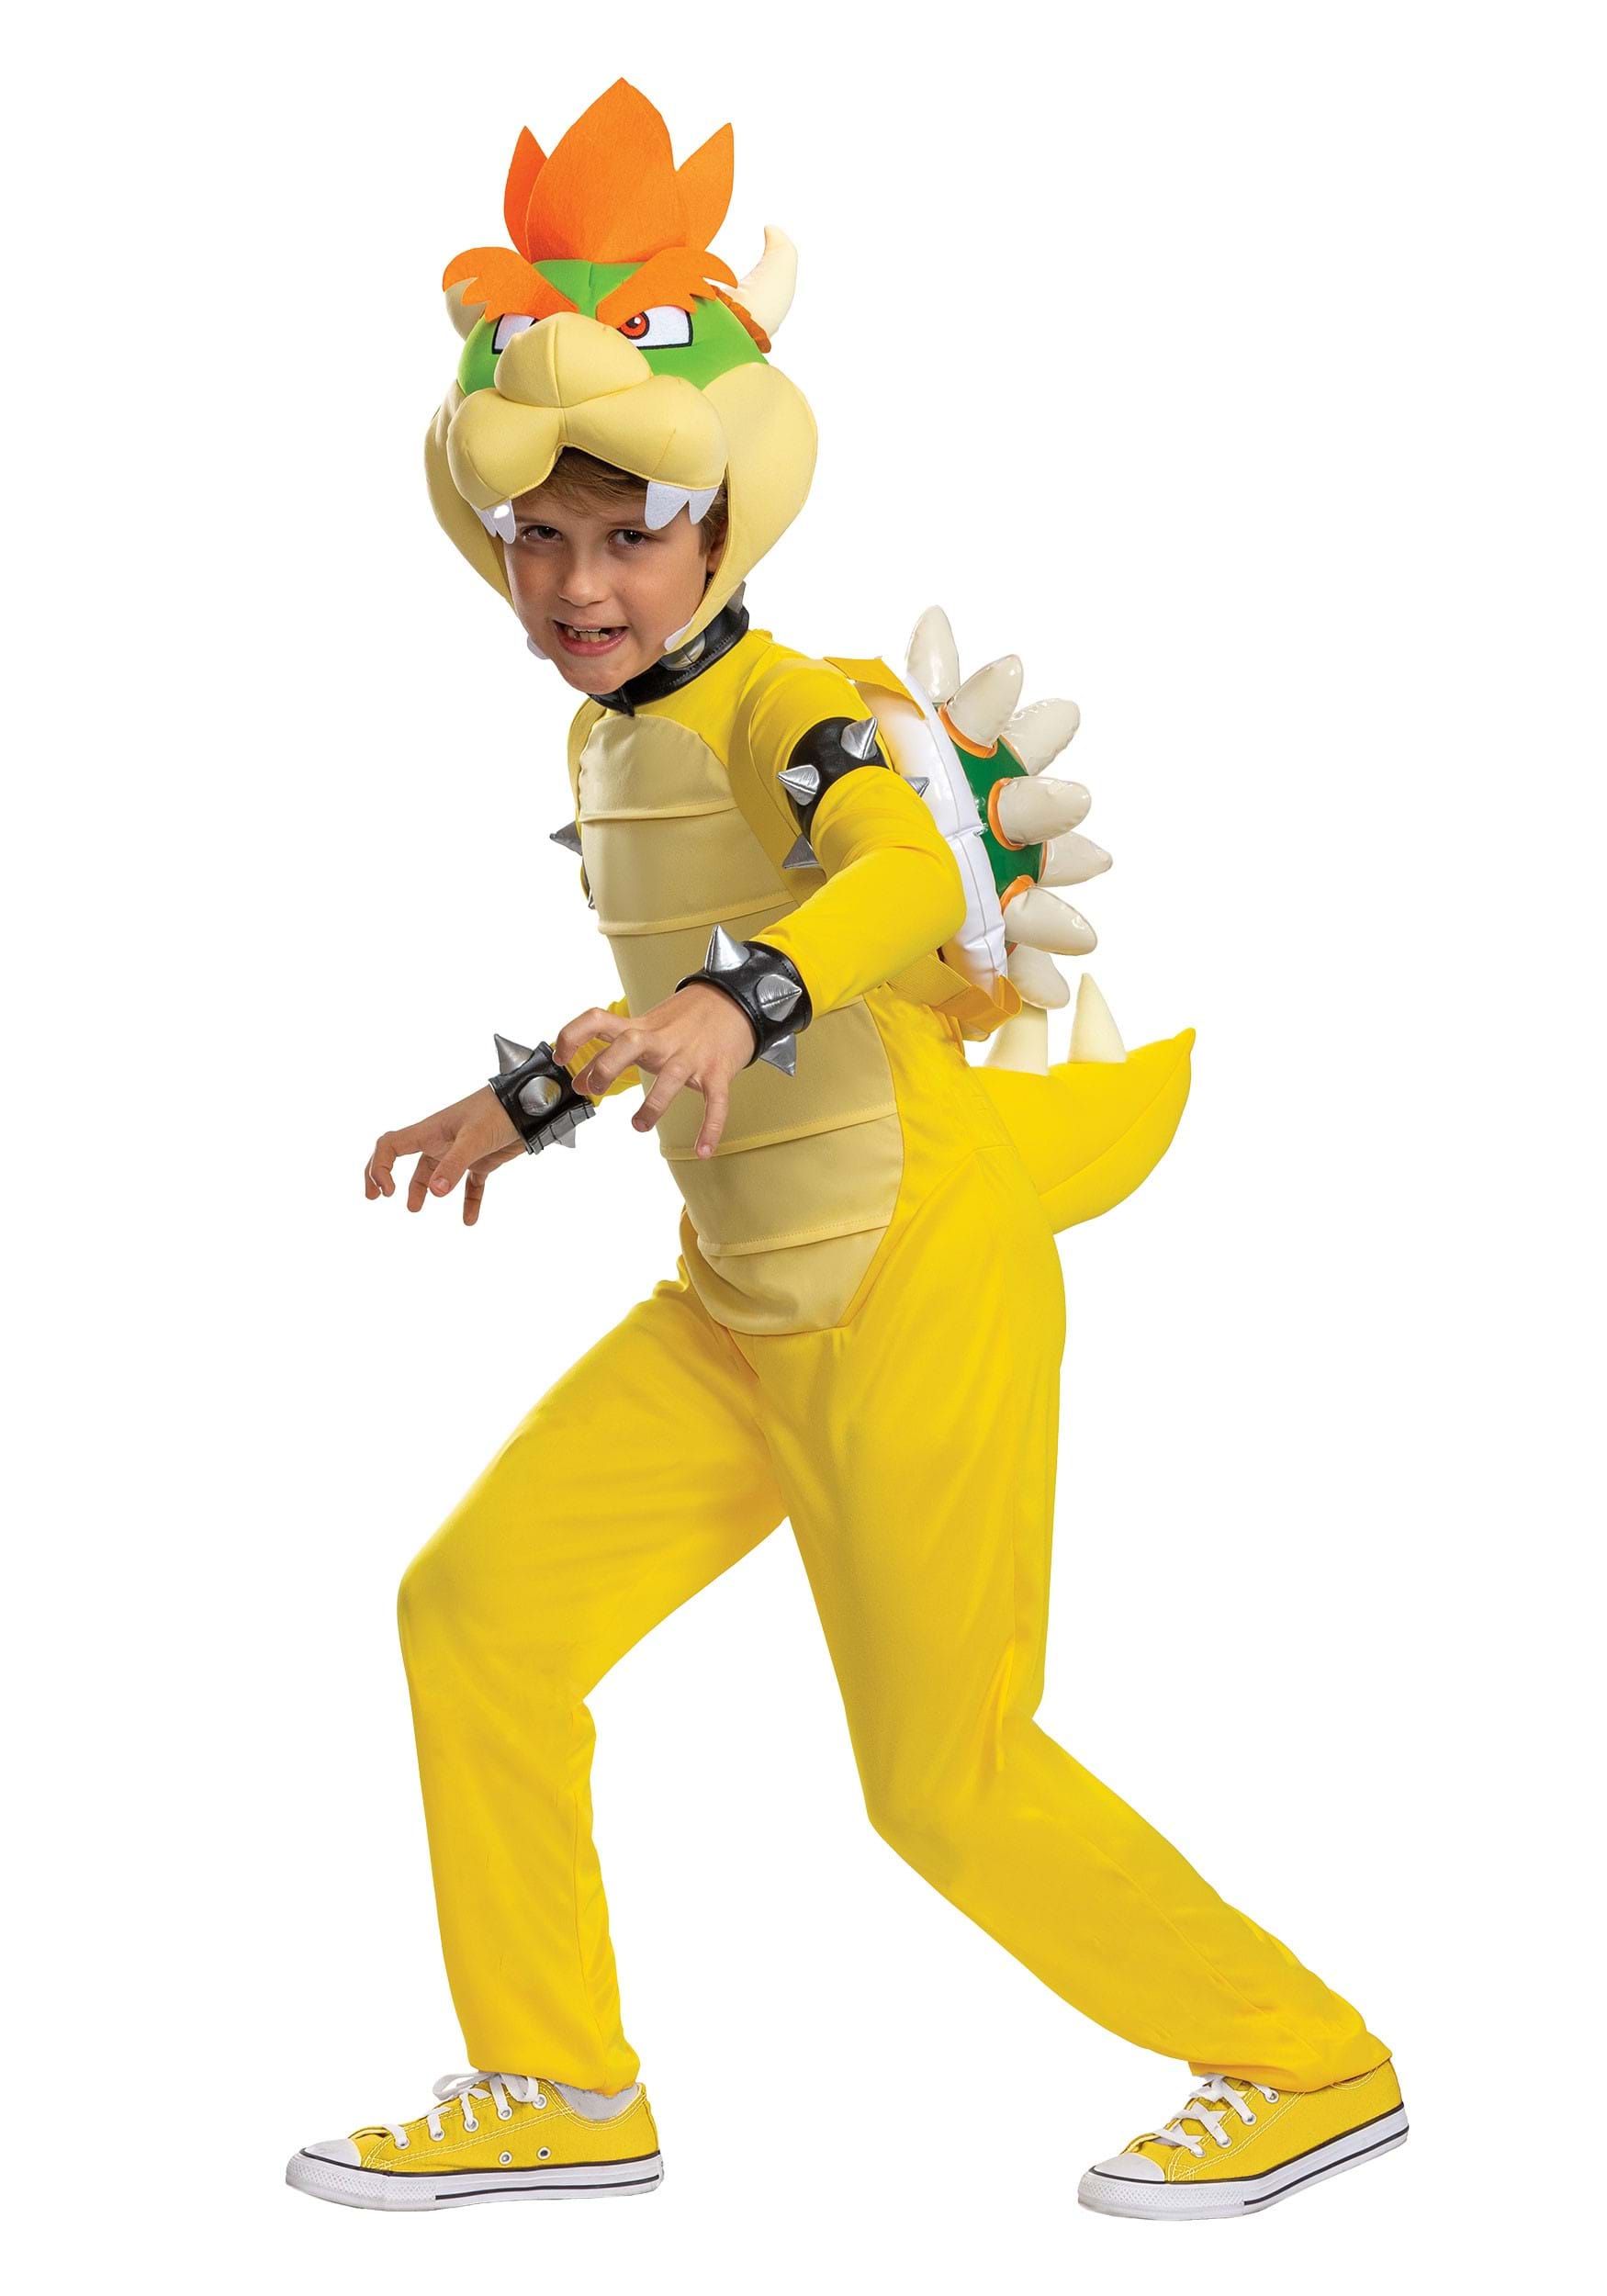 Super Mario Brothers Bowser Deluxe Costume for Kids